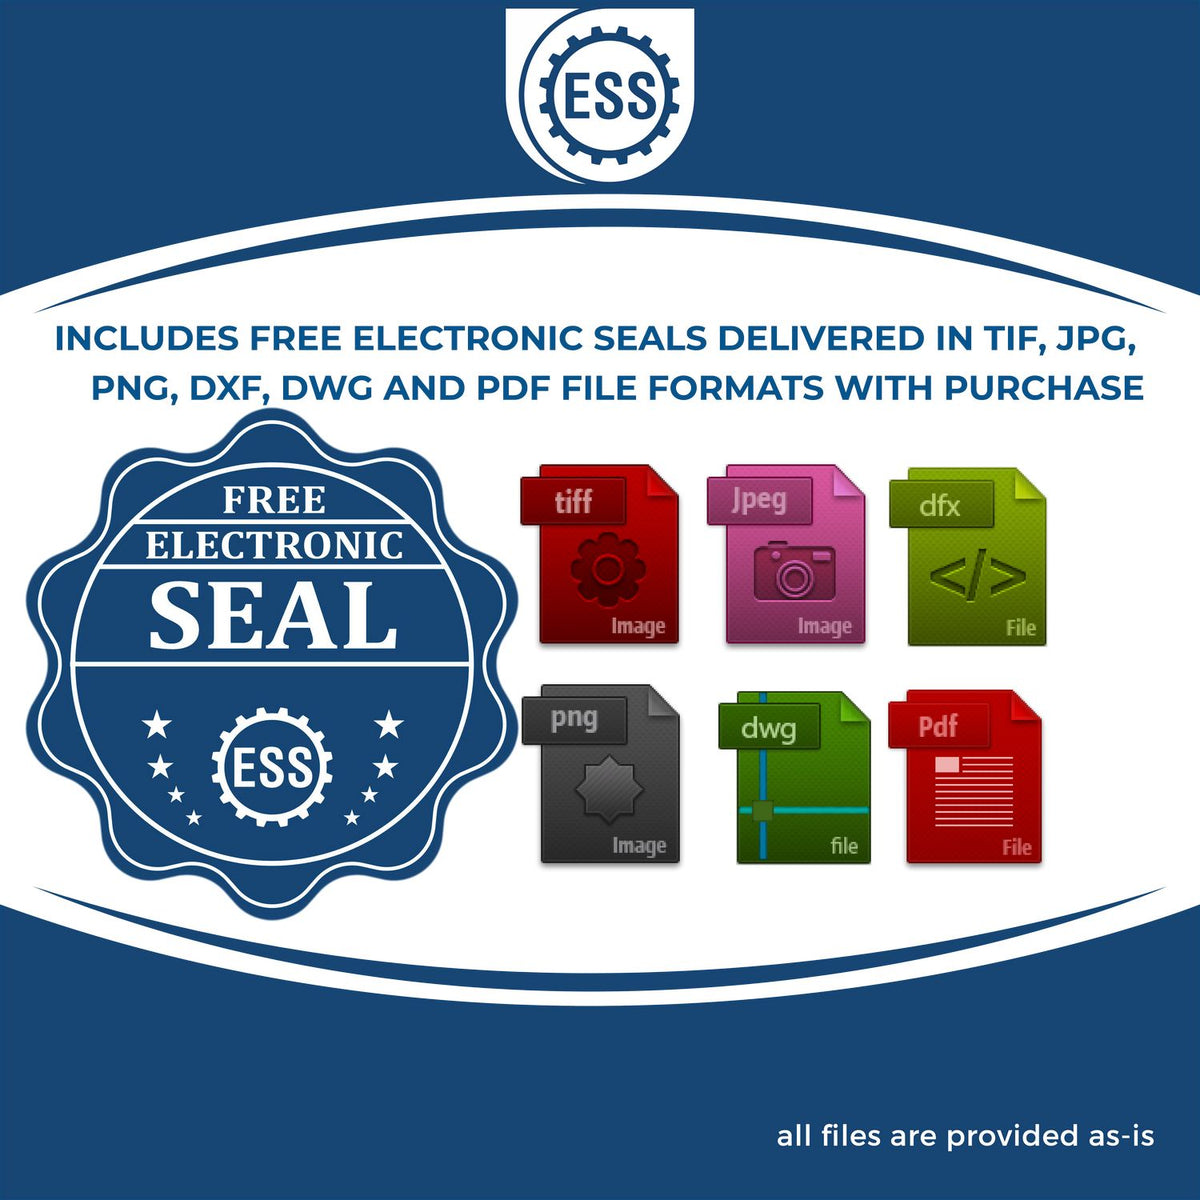 An infographic for the free electronic seal for the Soft Pocket Kansas Landscape Architect Embosser illustrating the different file type icons such as DXF, DWG, TIF, JPG and PNG.